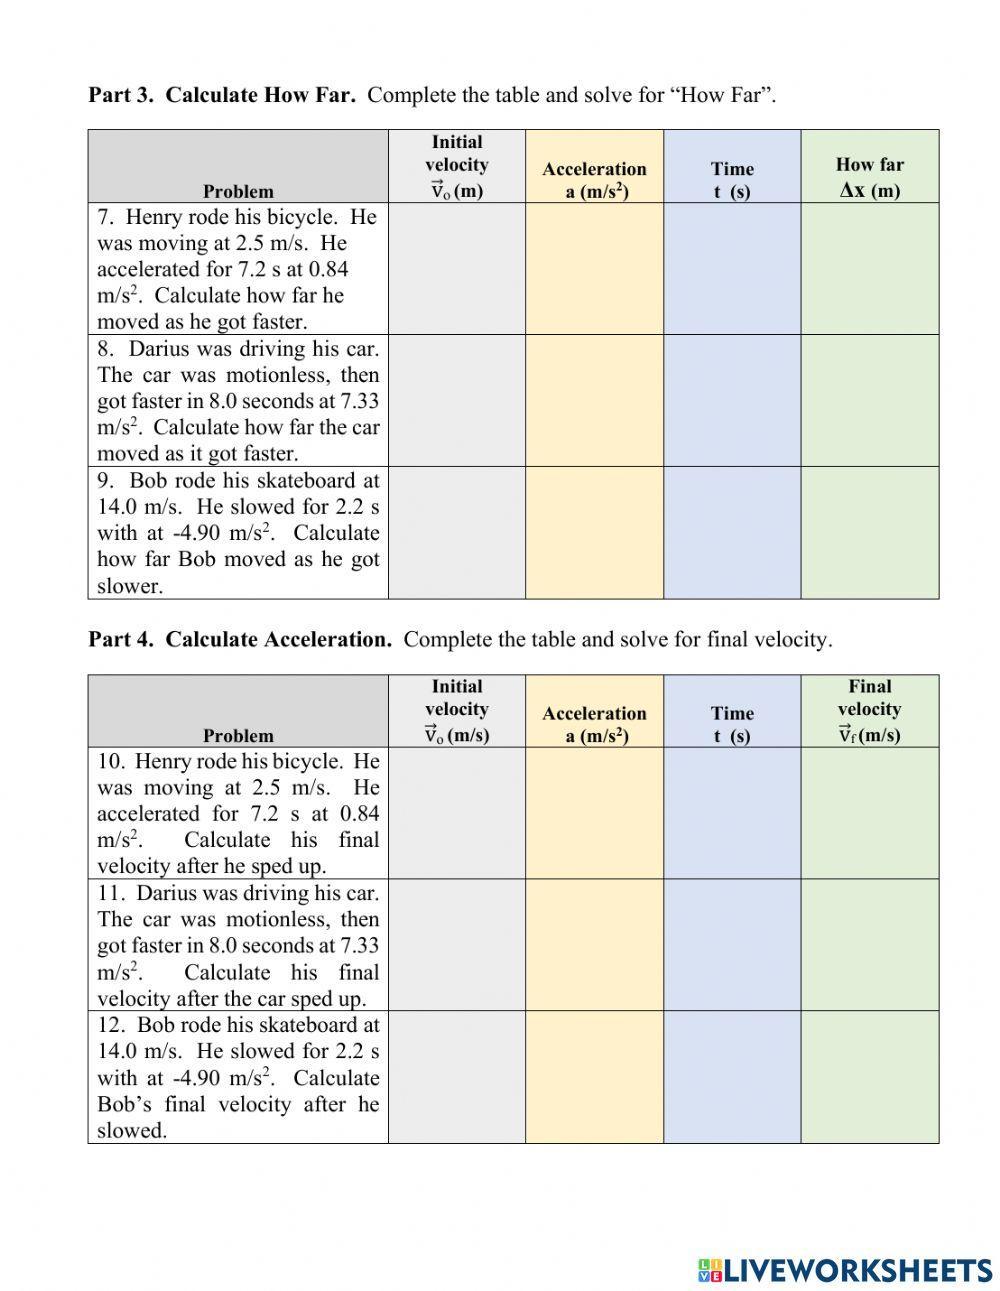 Sp2023 Acceleration & Velocity Calculations